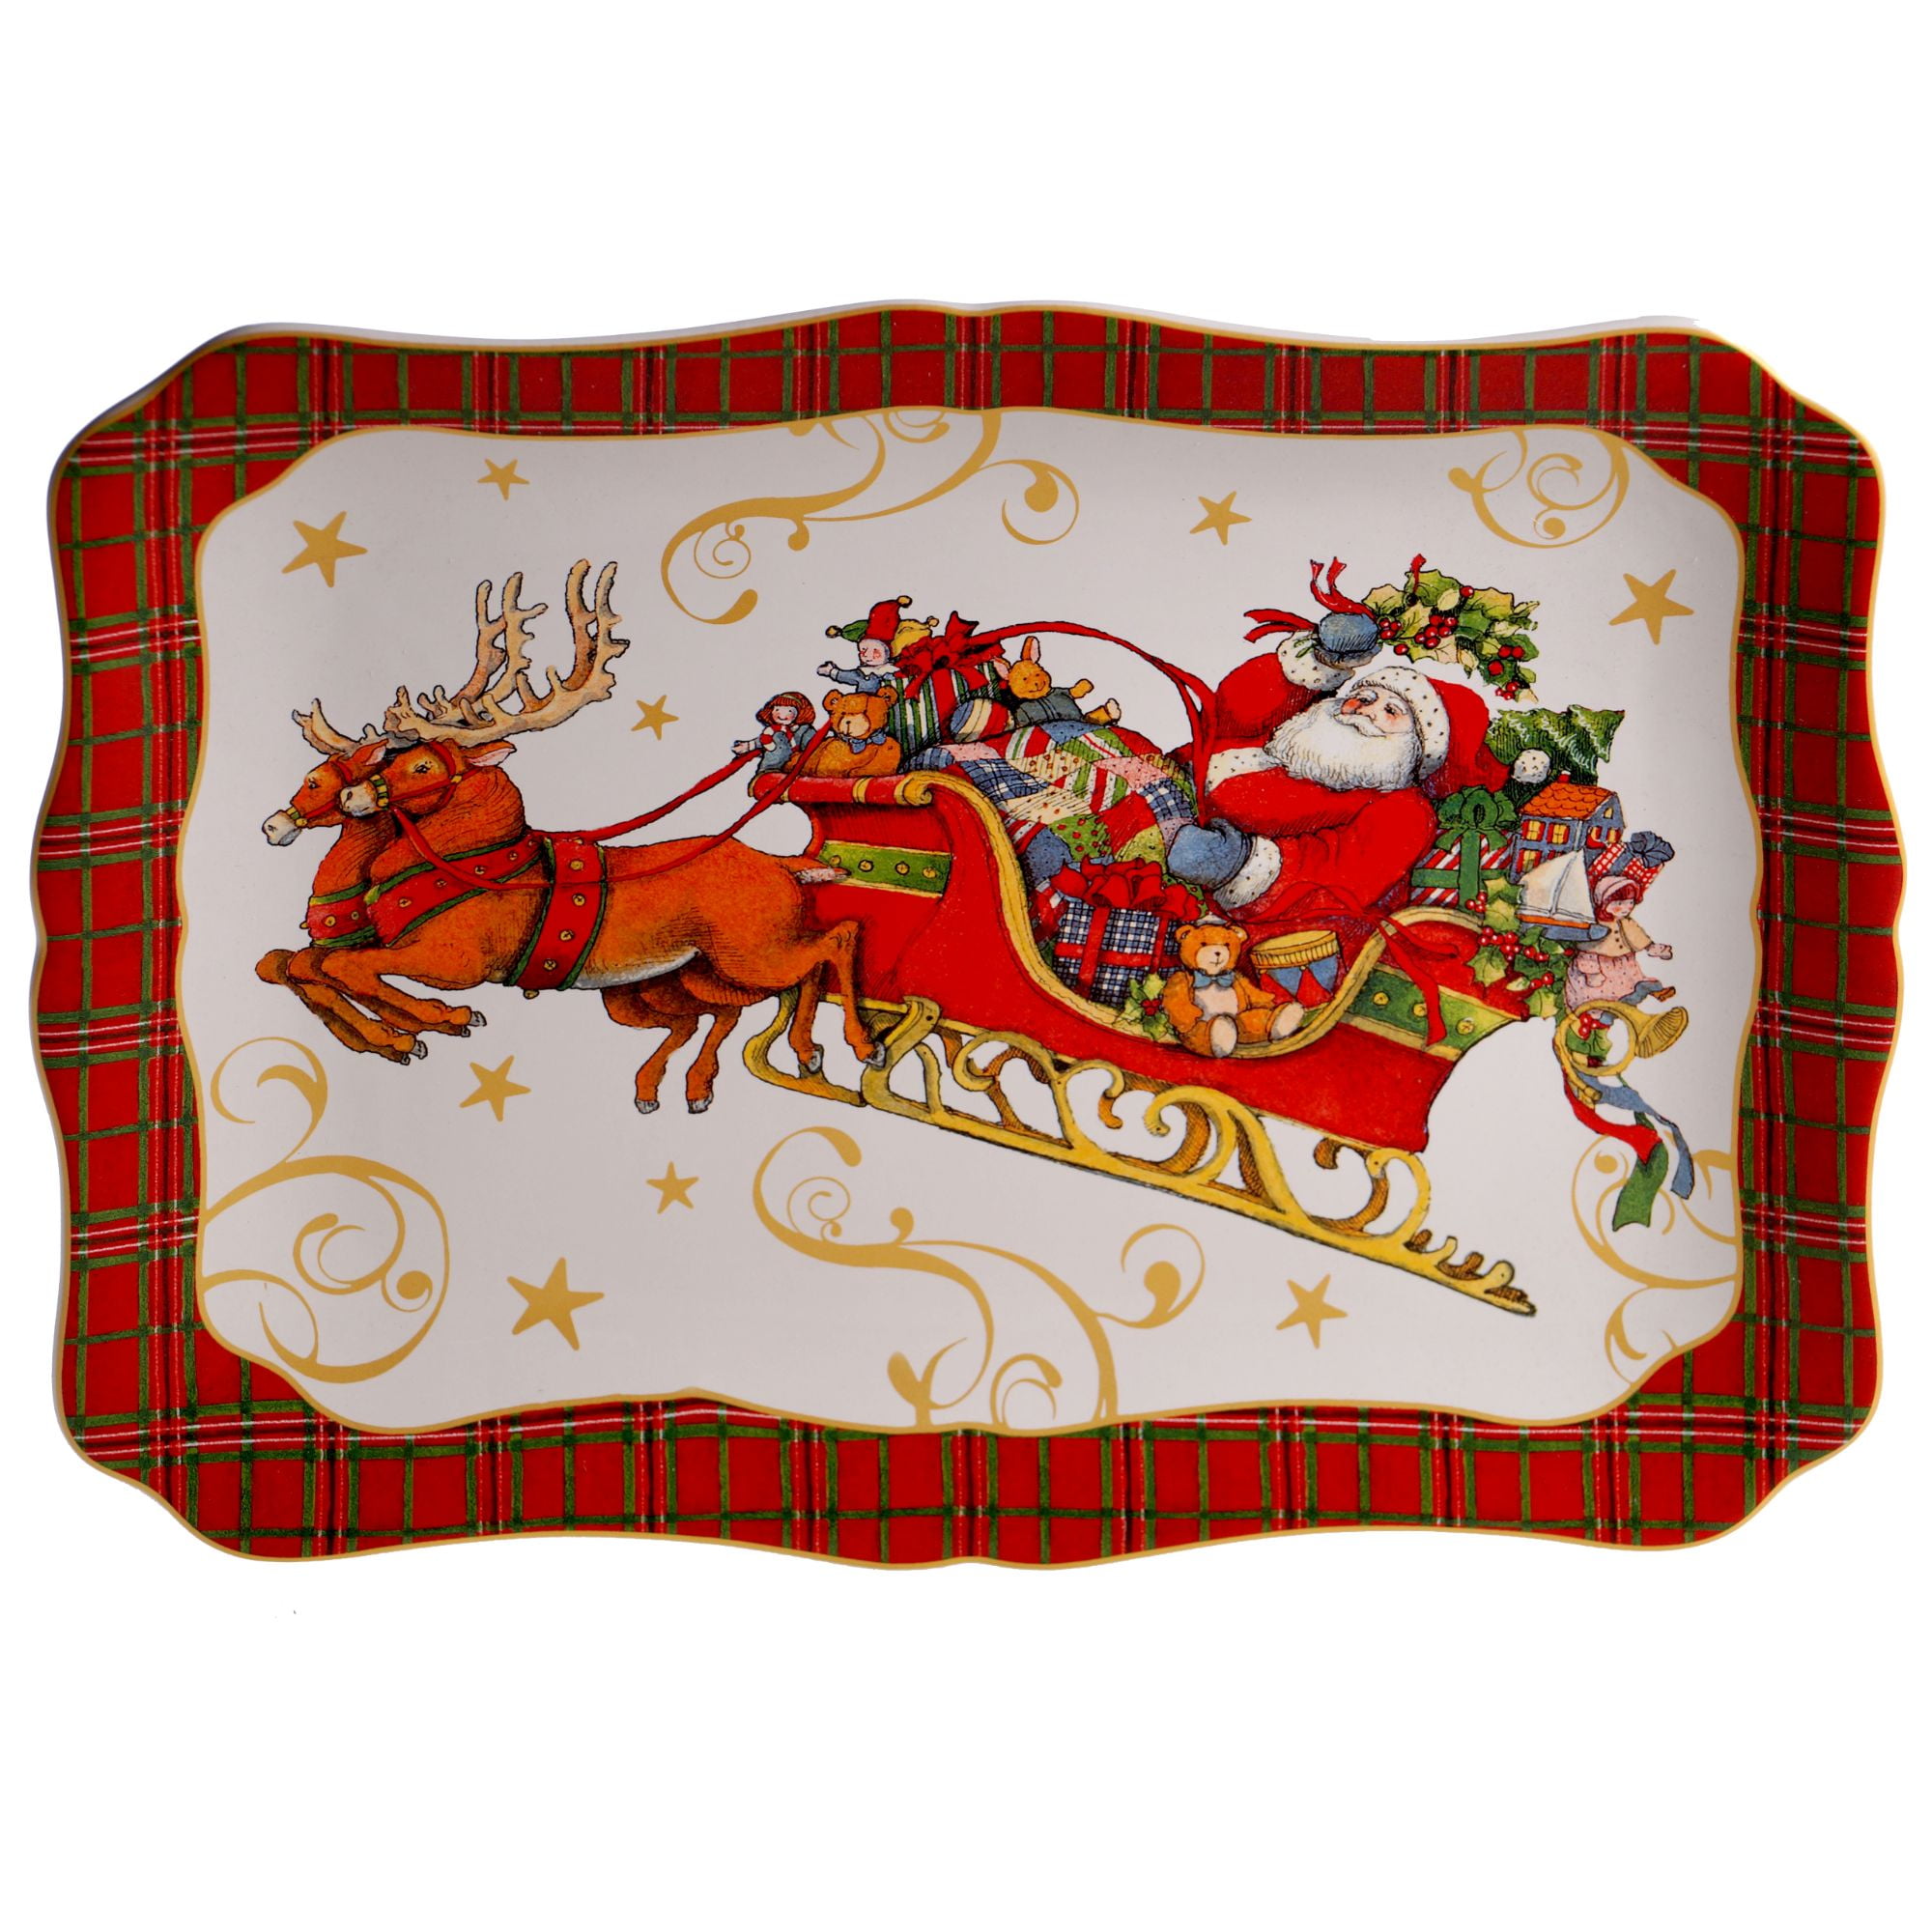 $1 ea Holiday Christmas Serving dishes to go containers etc. $1 each  picture - garage & moving sales - yard estate